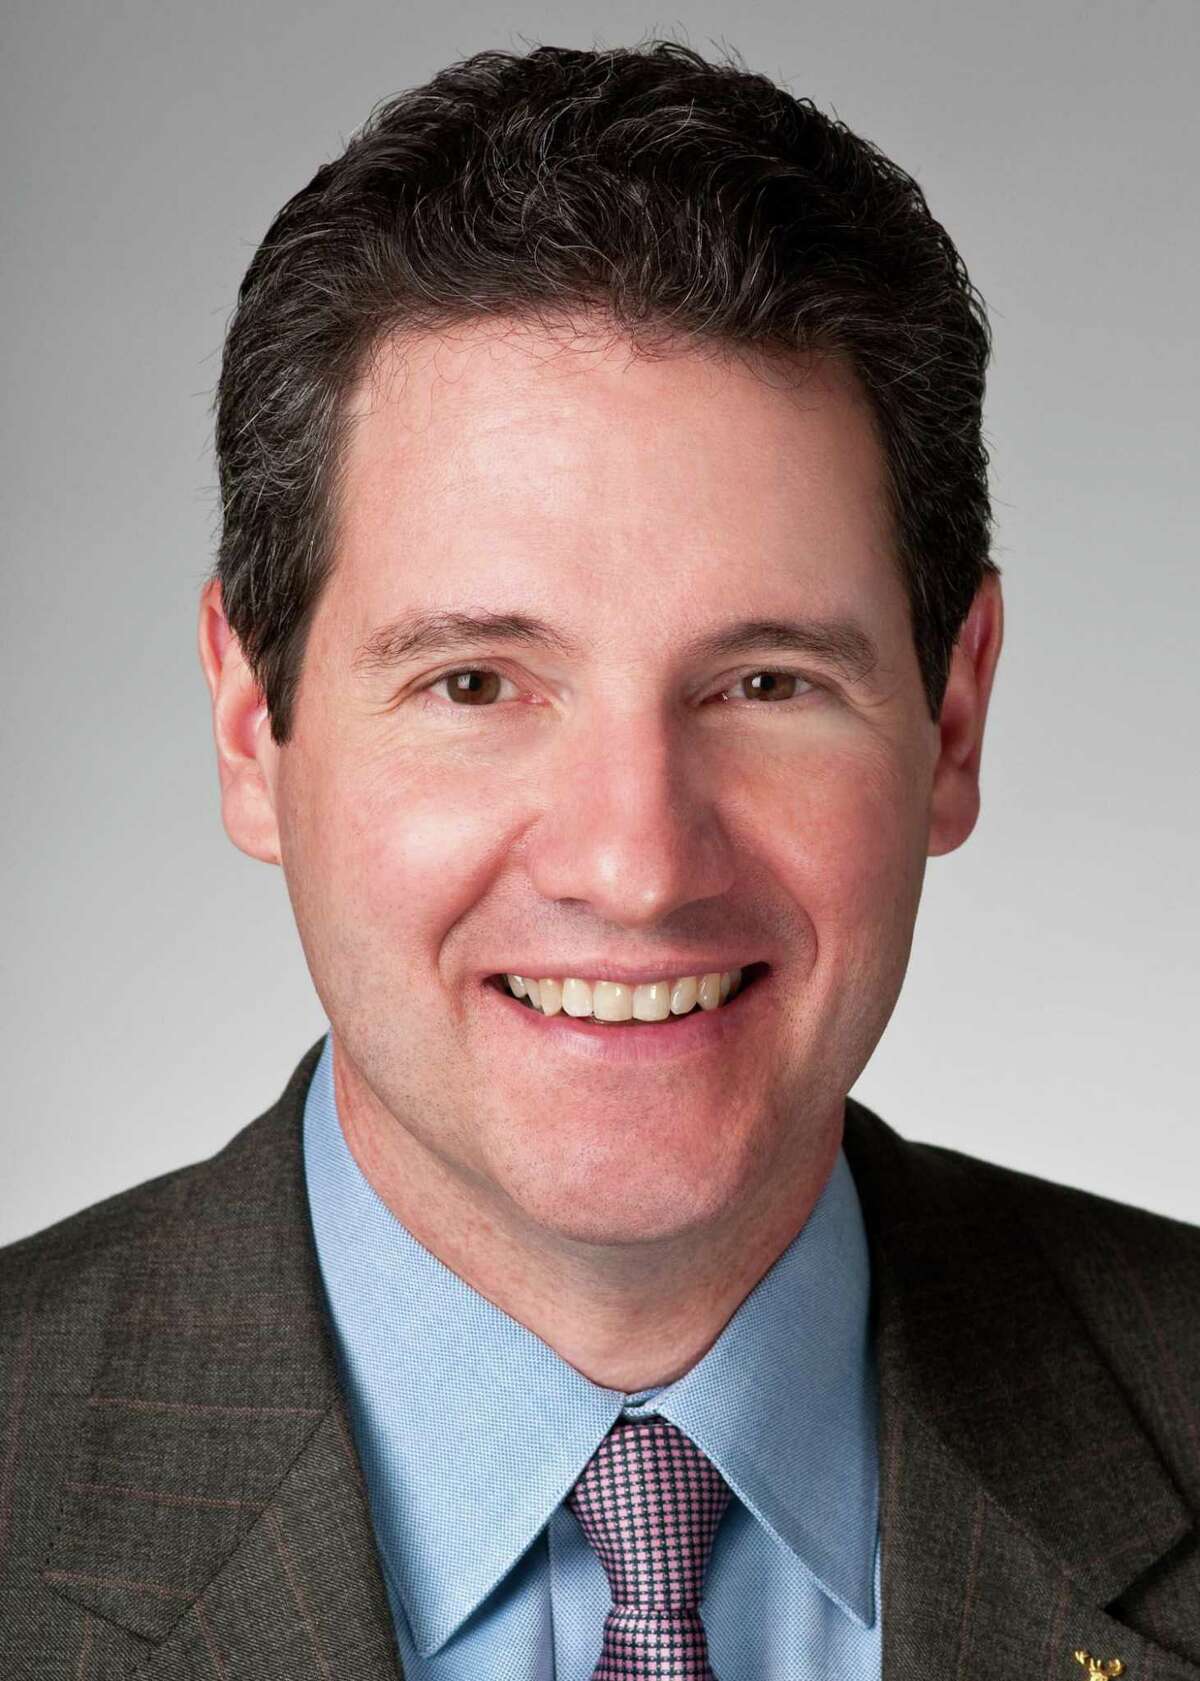 Christopher Swift is chief executive officer and chairman of The Hartford.